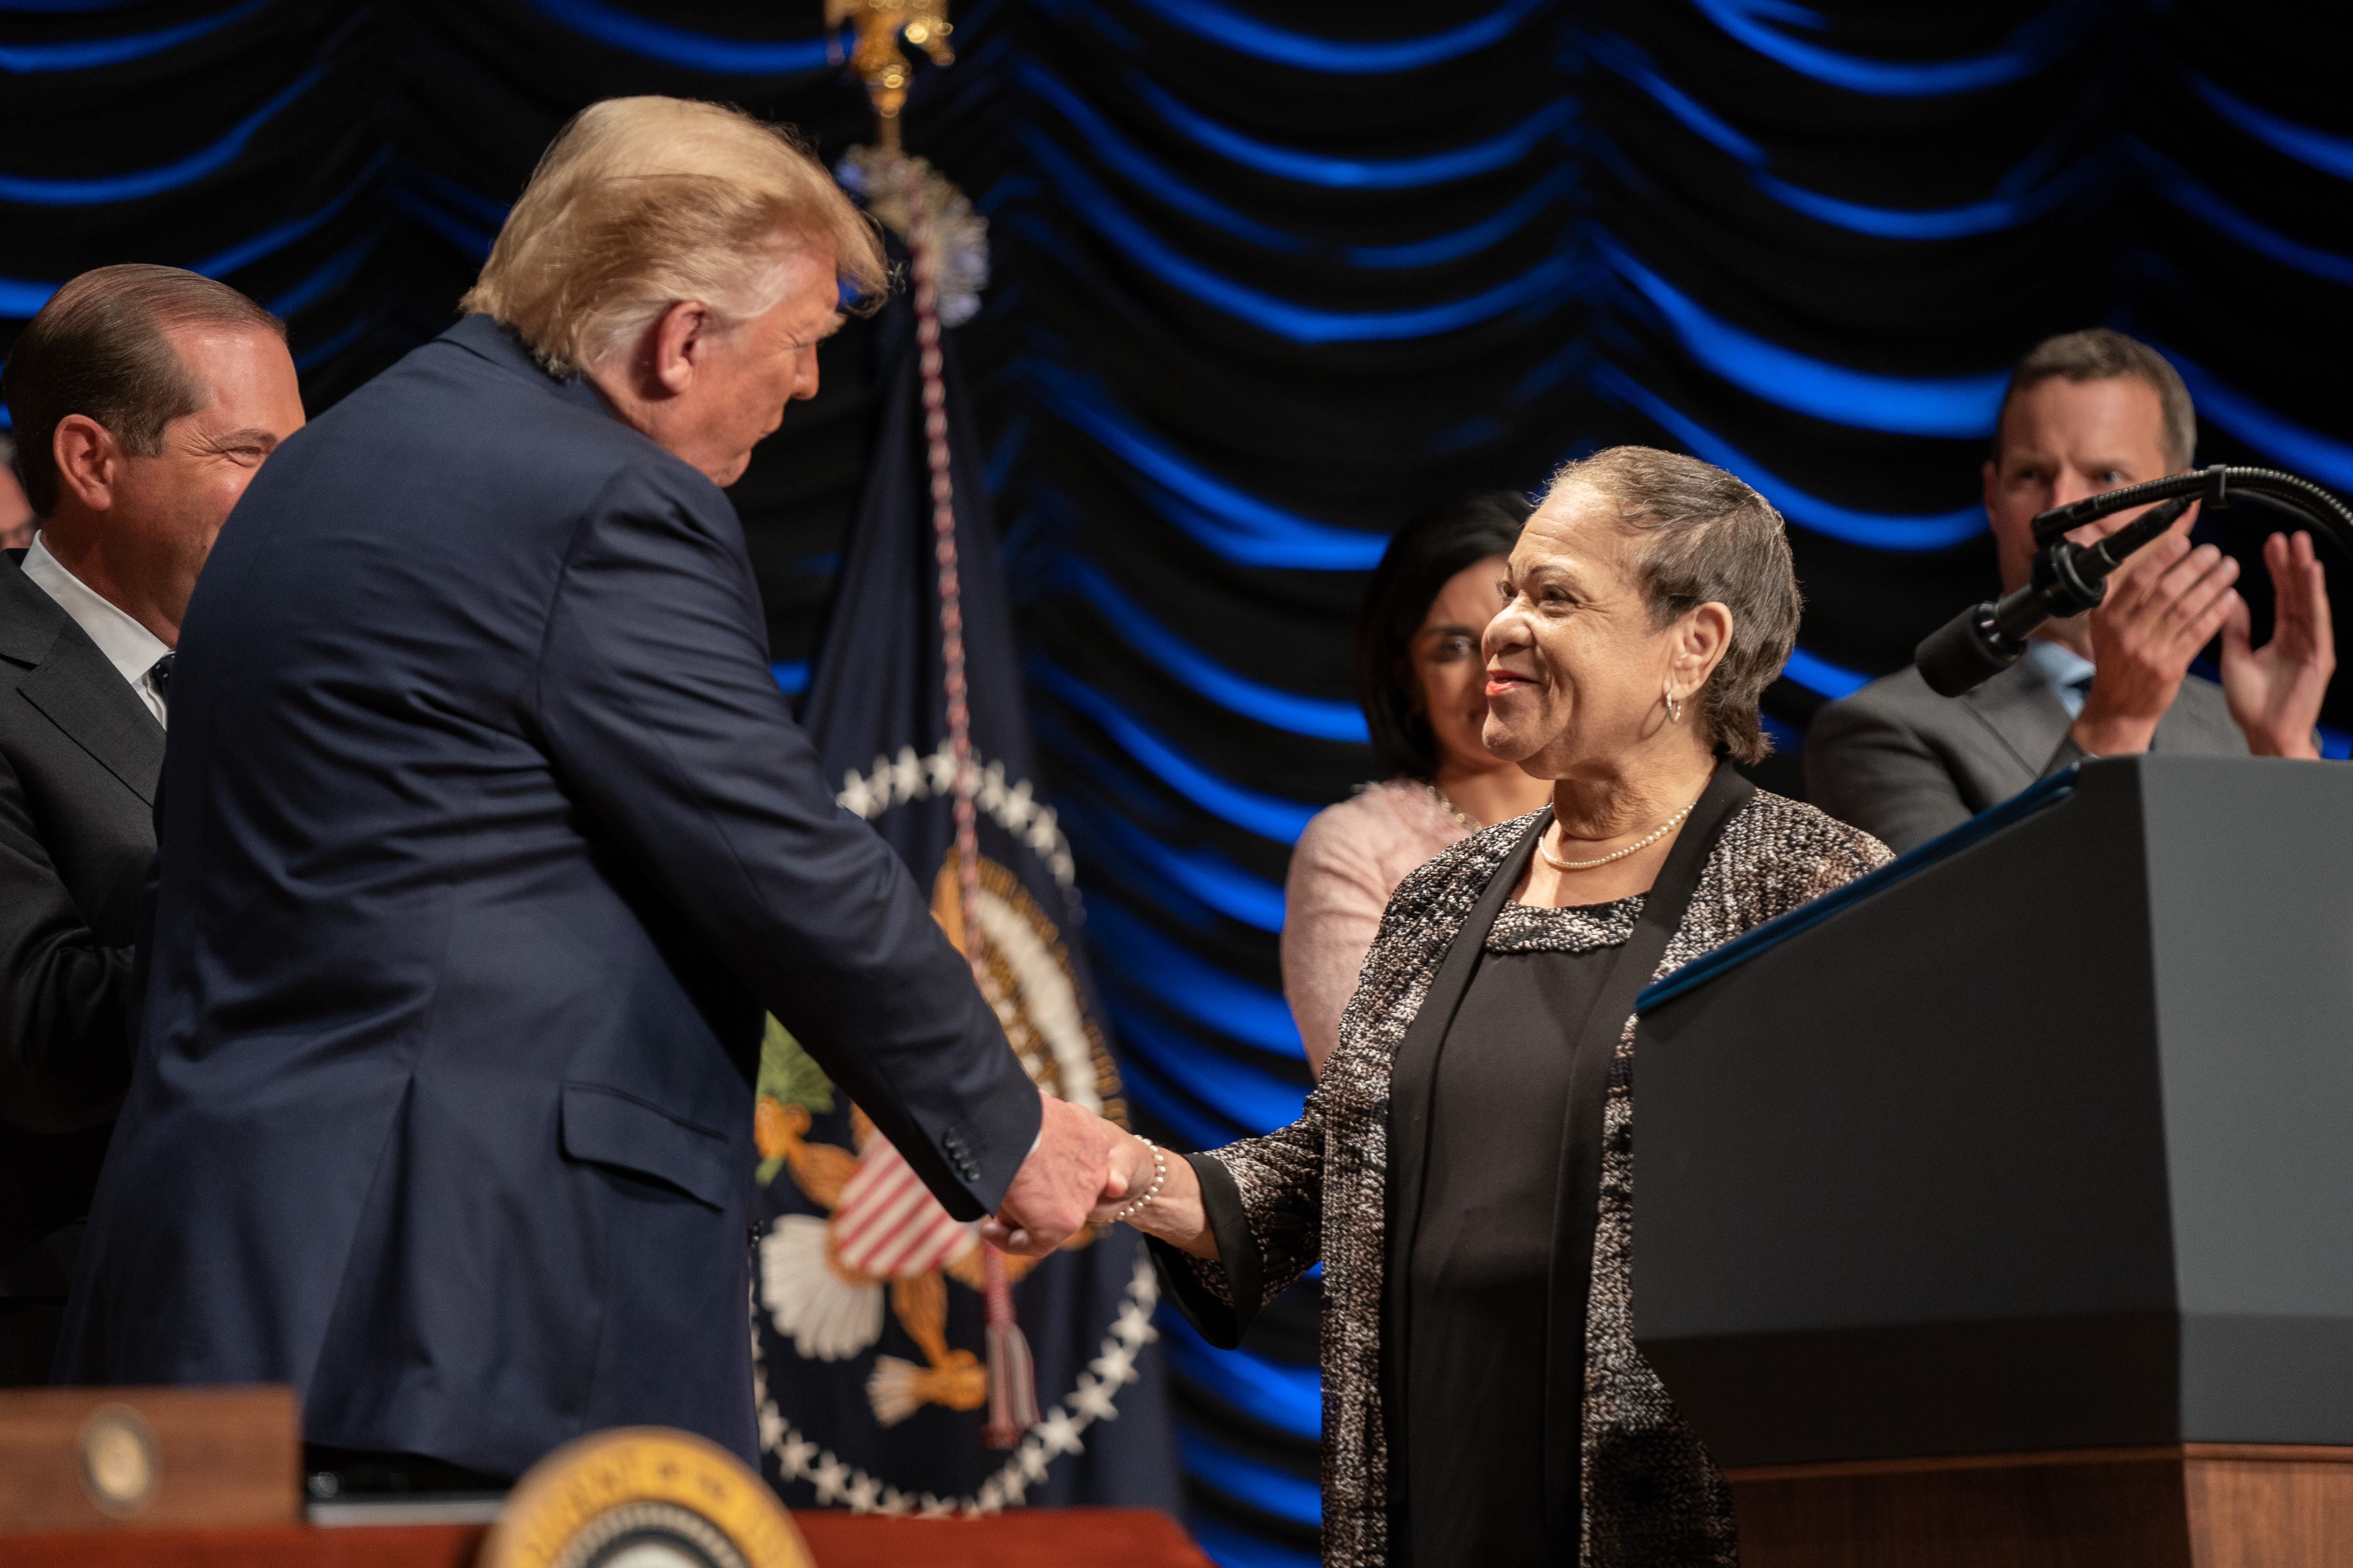 President Donald J. Trump thanks DPC Board Member Nancy Scott prior to signing an Executive Order on Advancing American Kidney Health Wednesday, July 10, 2019, at the Ronald Reagan Building and International Trade Center in Washington, D.C. (Official White House Photo by Shealah Craighead)